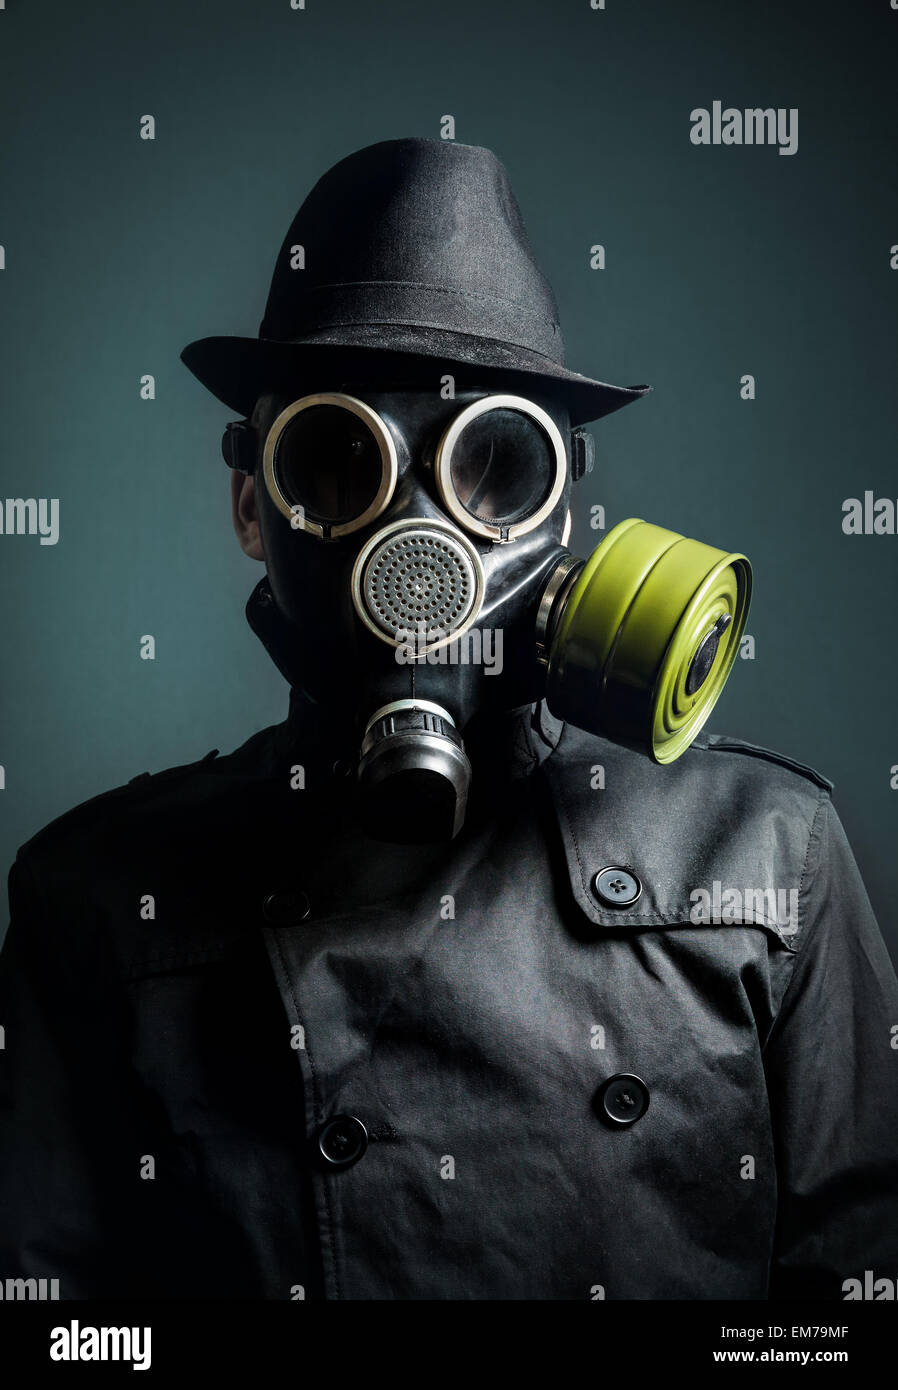 Man in gas mask, raincoat and black hat at dark background Stock Photo